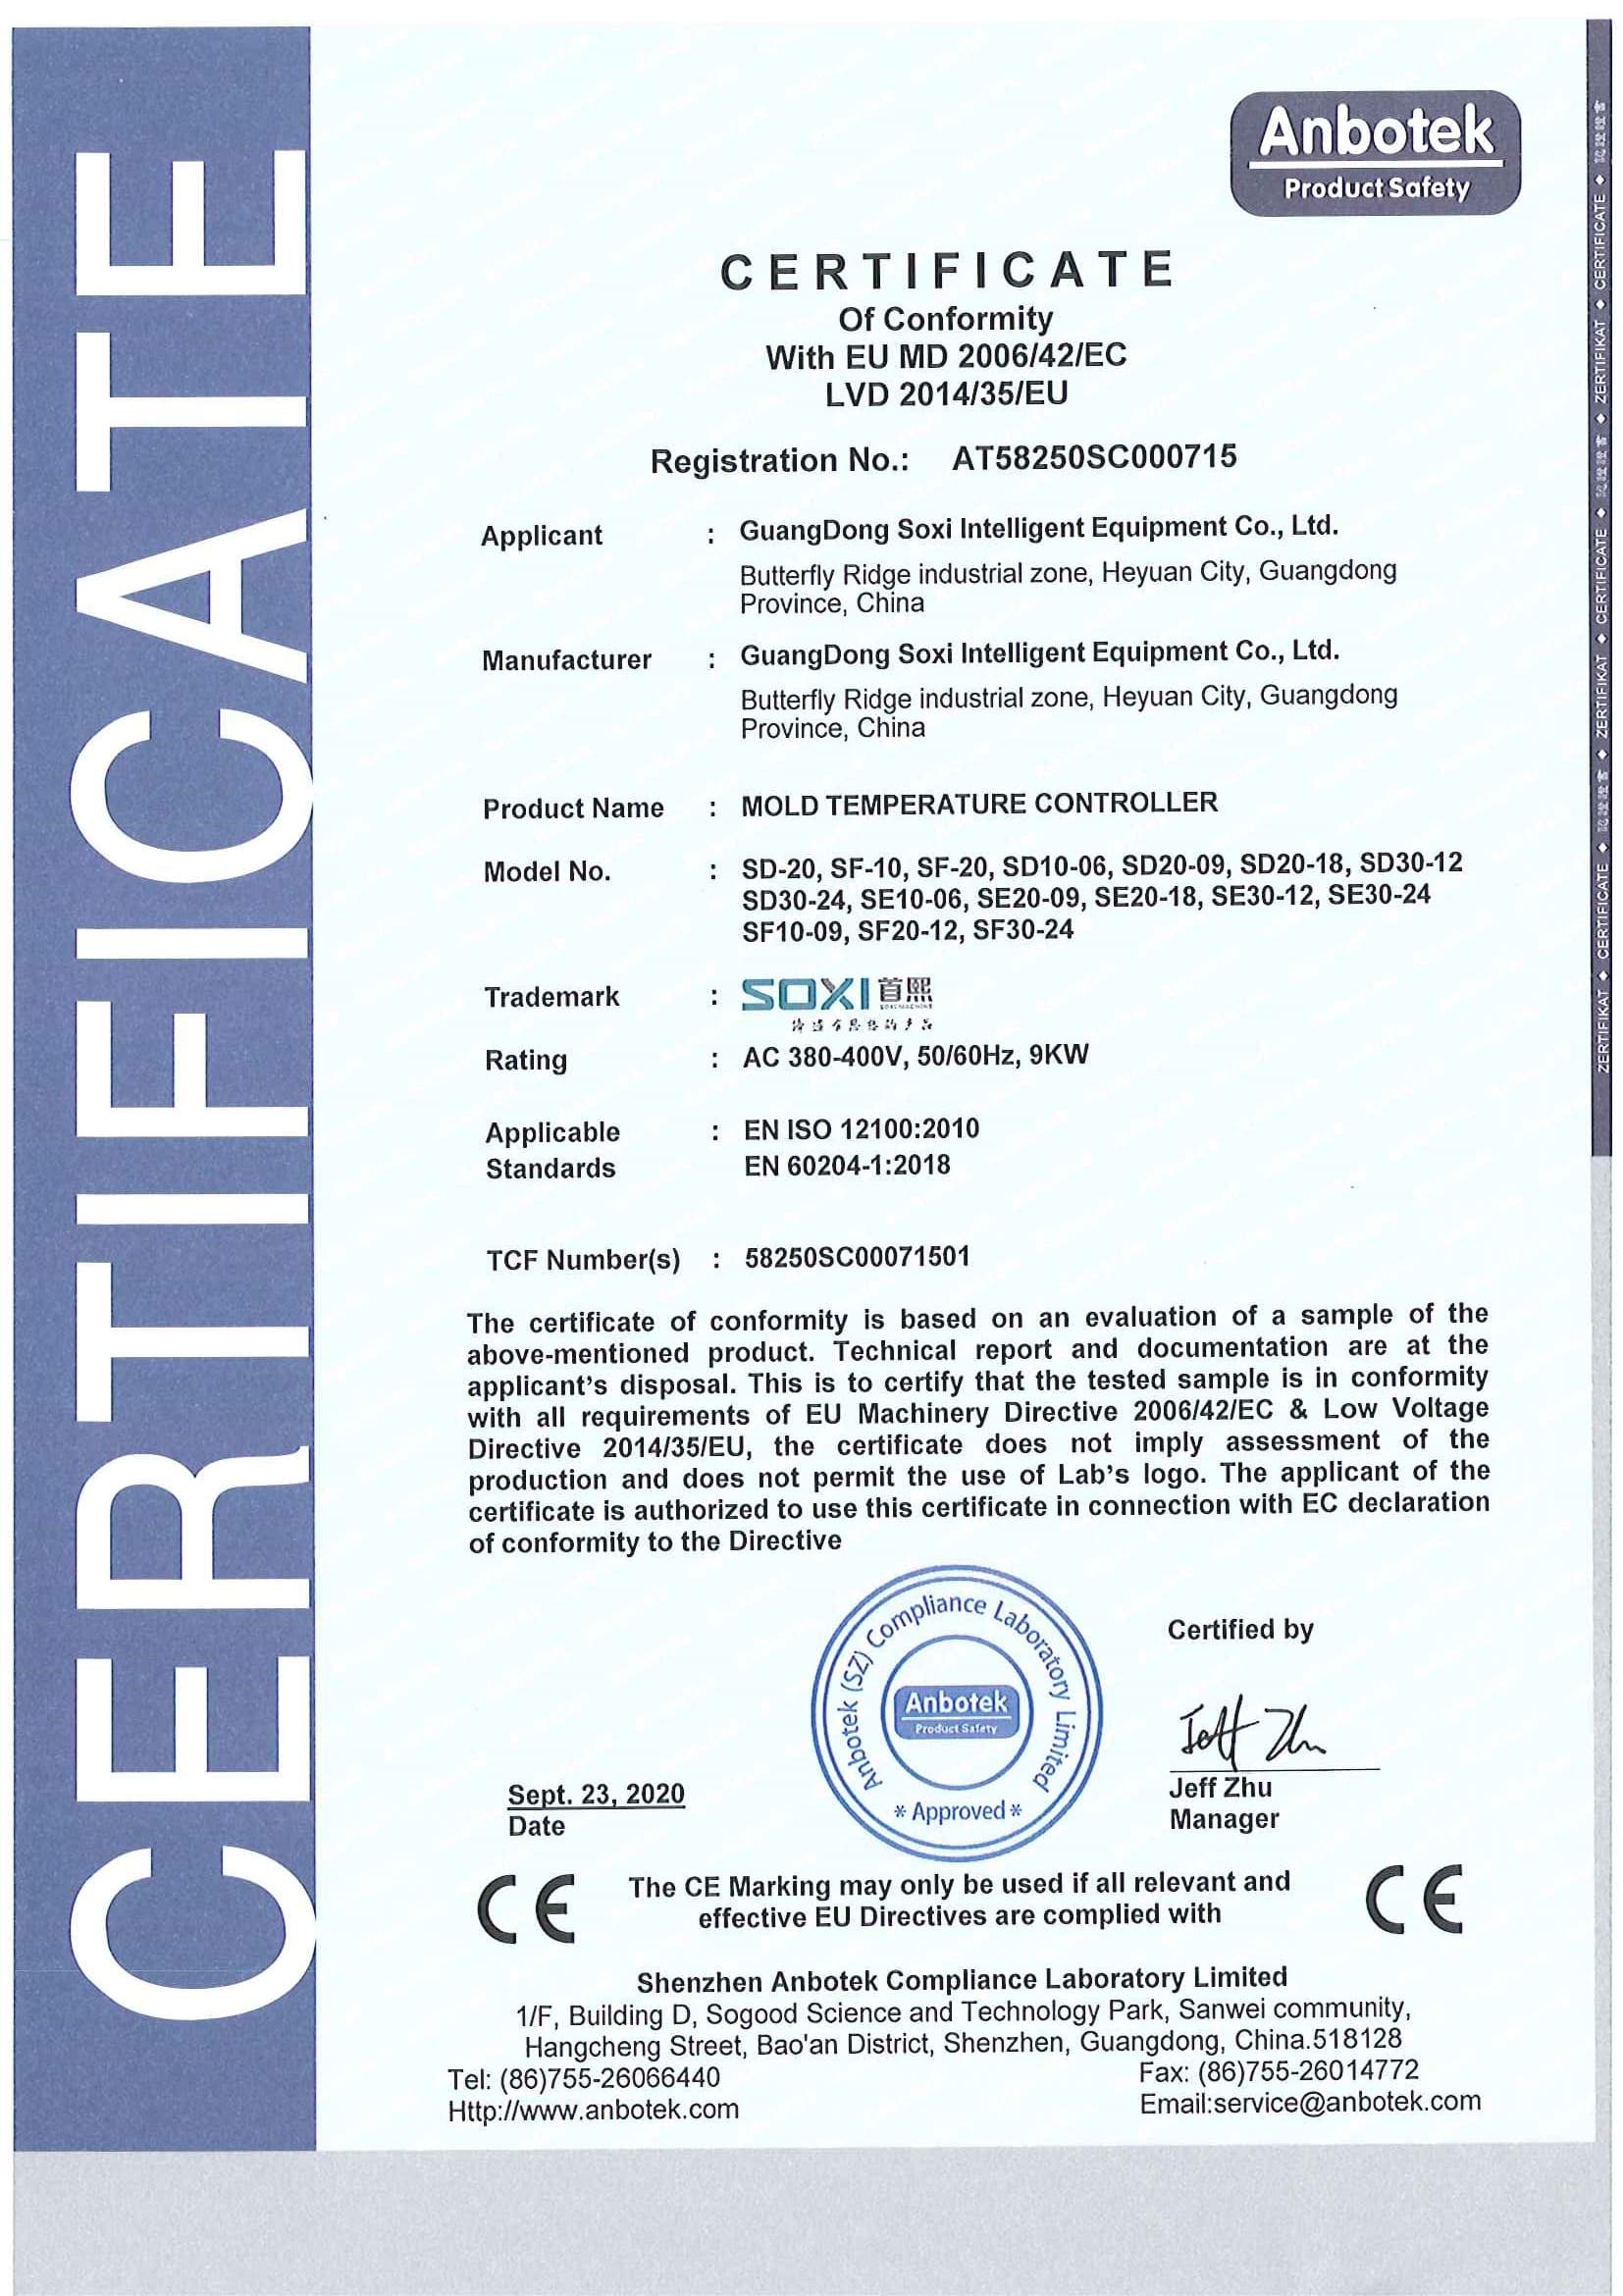 Certificate Of Conformity With EU MD